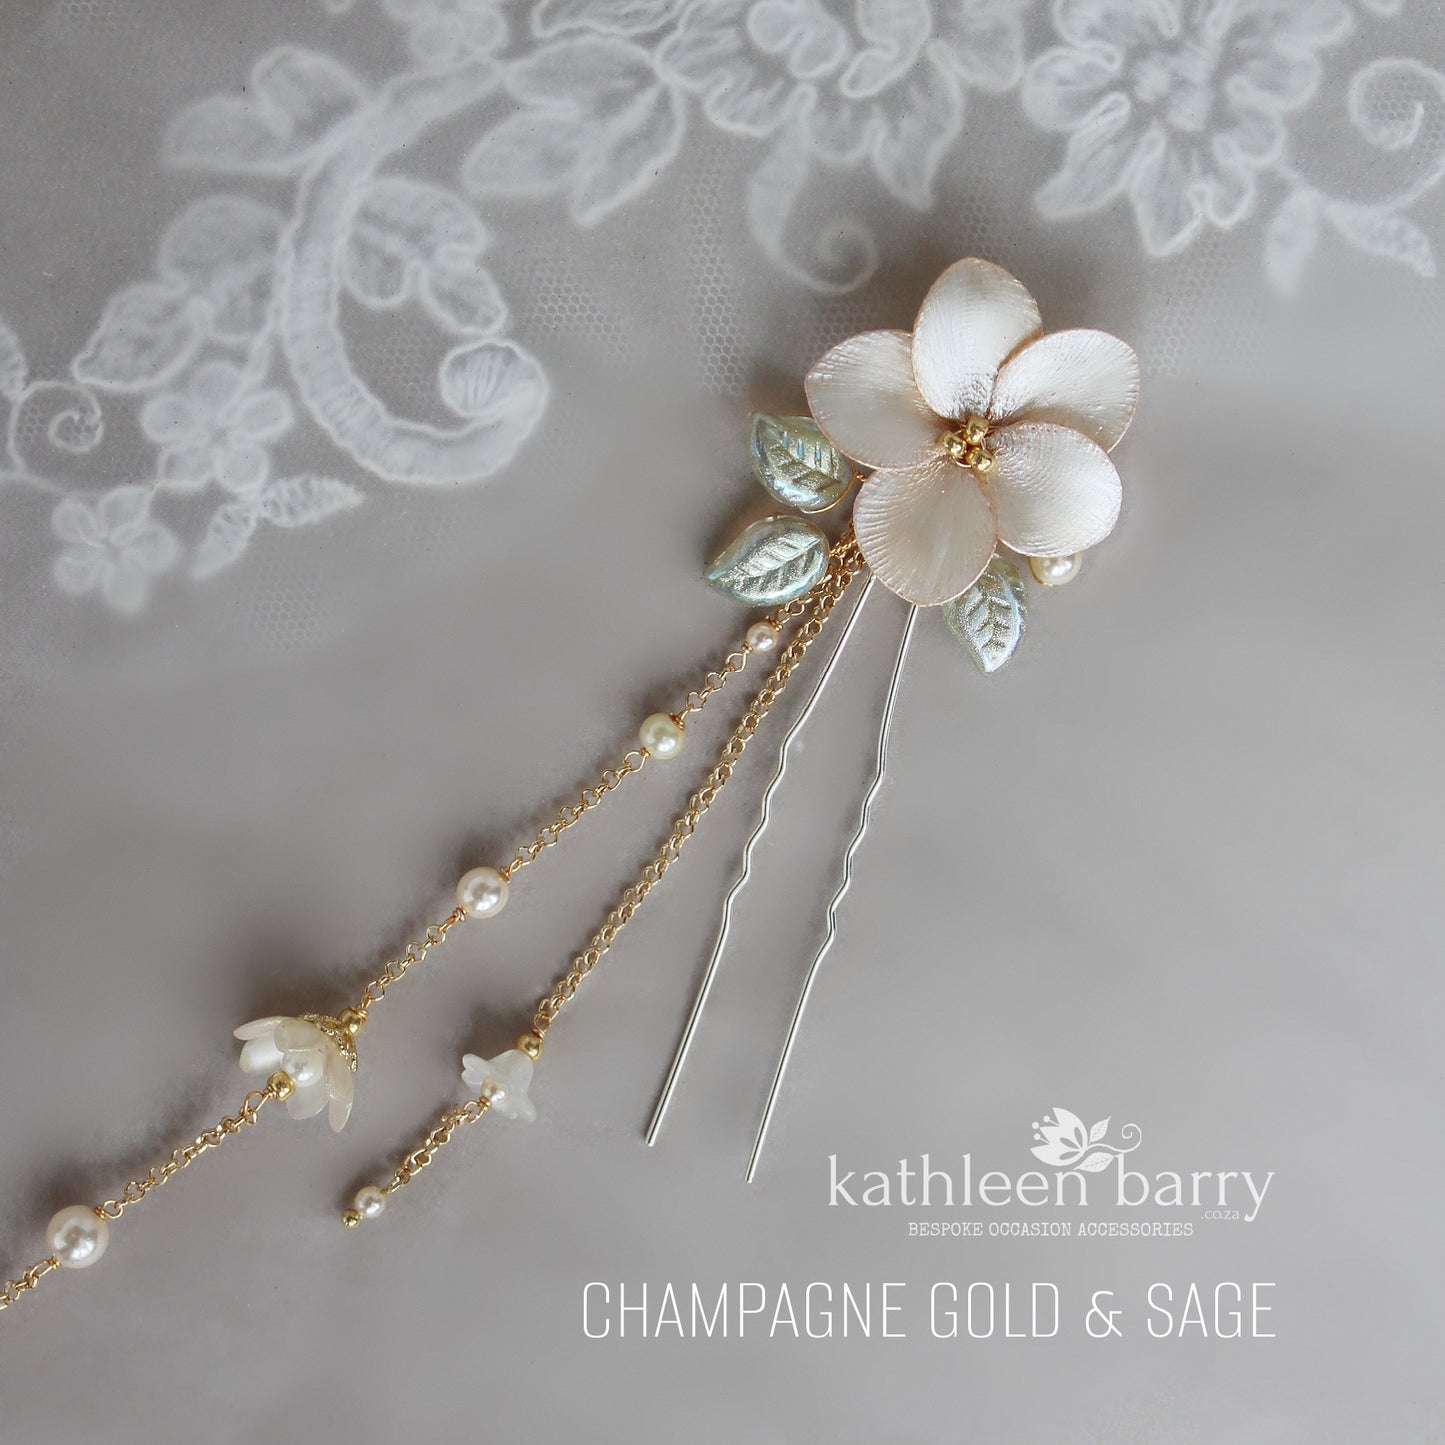 Kristin flower hair pin with dangle detail set or individually - assorted custom colors available wedding hair jewellery bridal accessories FROM: